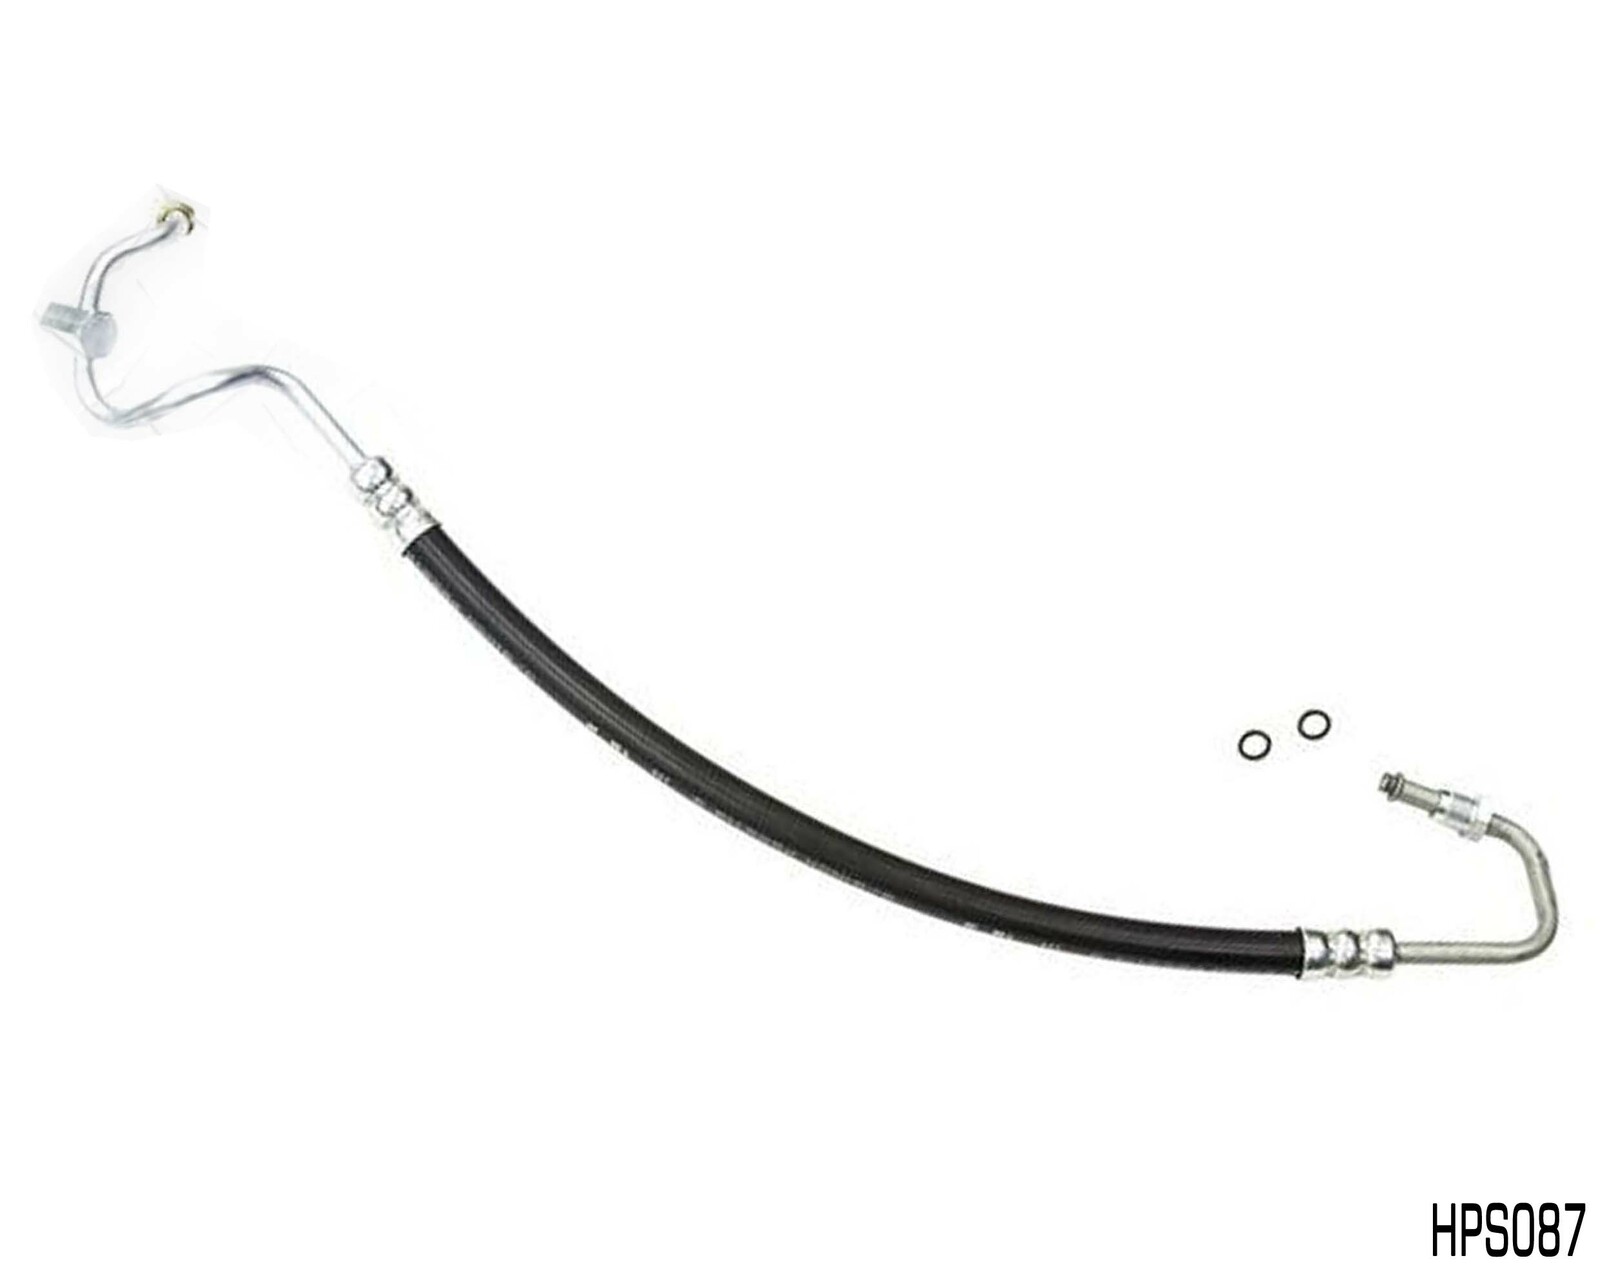 KELPRO POWER STEERING HOSE FOR FORD FALCON BA BF 4.0L XR6 WITH 16